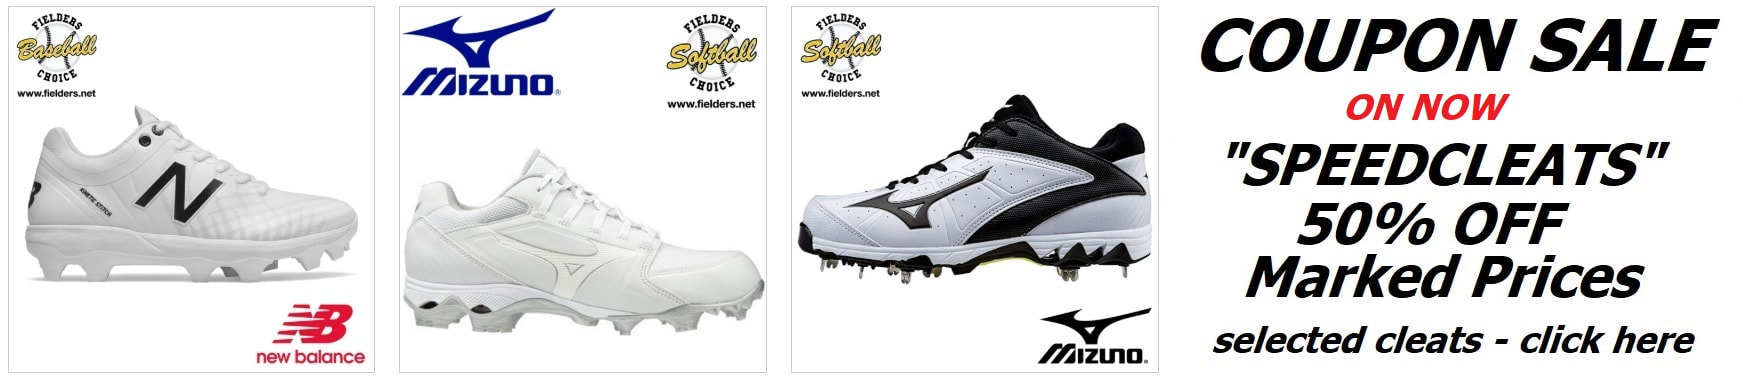 Womens White Cleats Coupon Sale